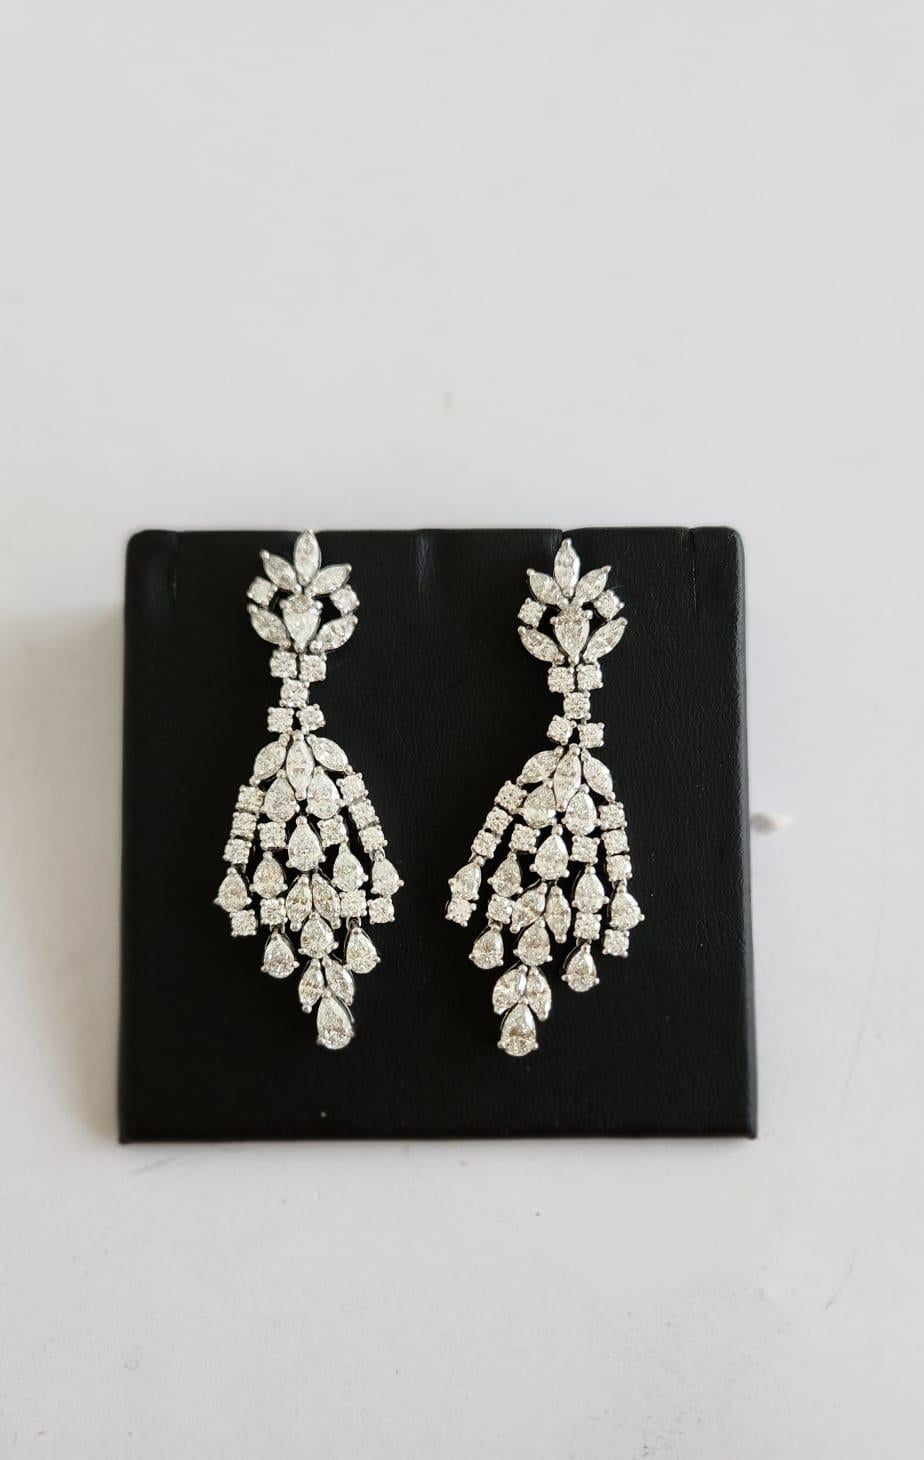 The Following Items we are offering is a Rare Important Spectacular and Brilliant 18KT Gold Large Gorgeous Fancy Cascading Diamond Drop Draping Earrings. Earrings consists of Rare Fine Magnificent Fancy Glittering Diamonds. T.C.W. over 10CTS of